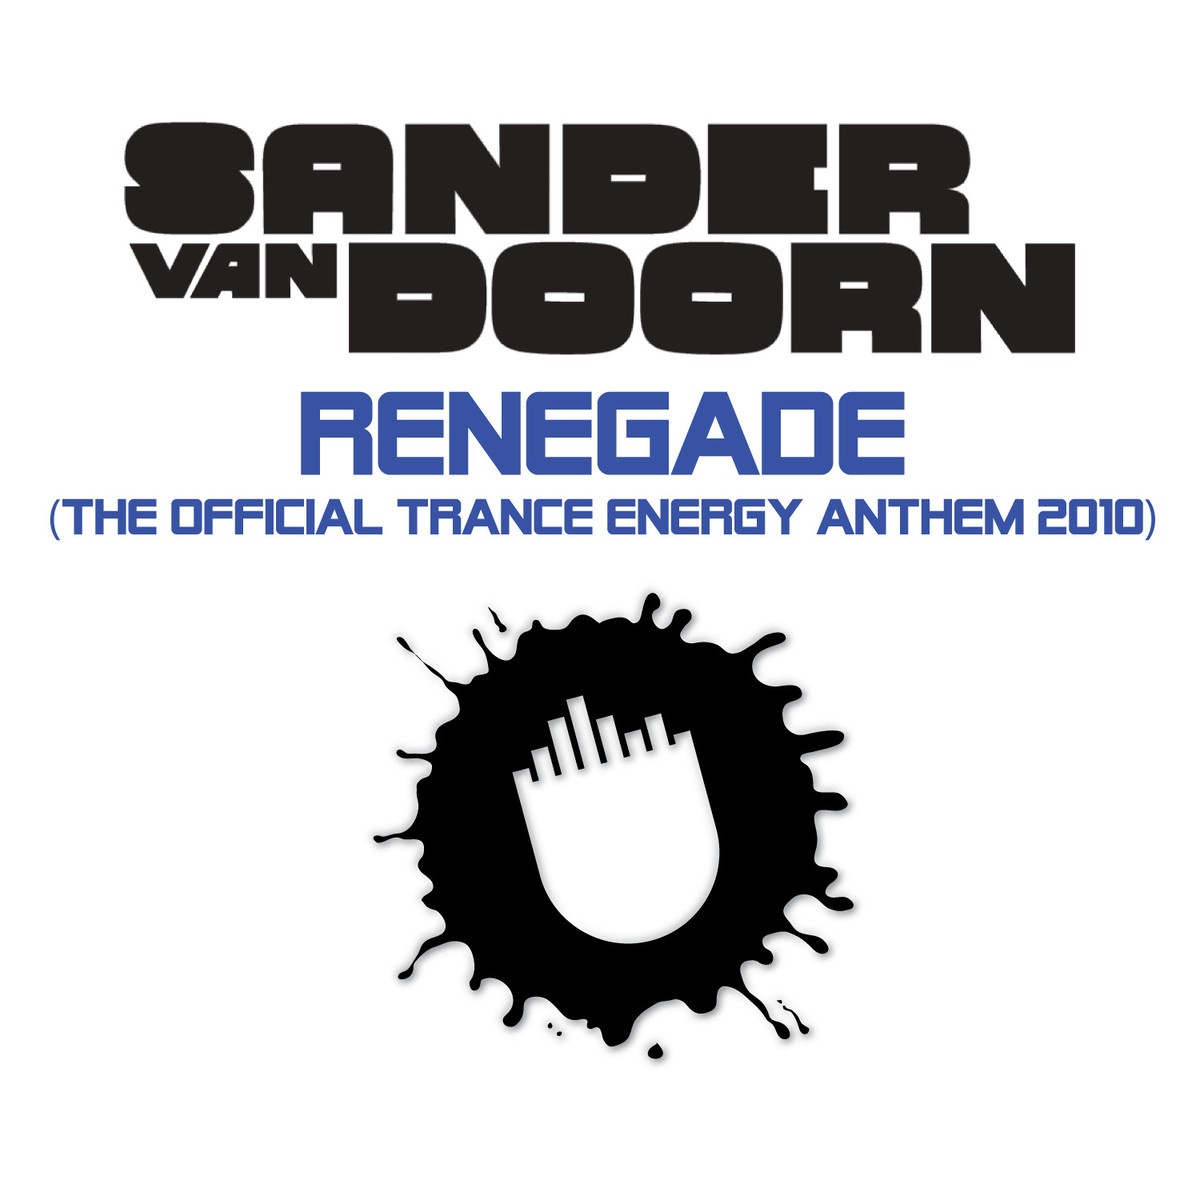 Renegade (The Official Trance Energy Anthem 2010)